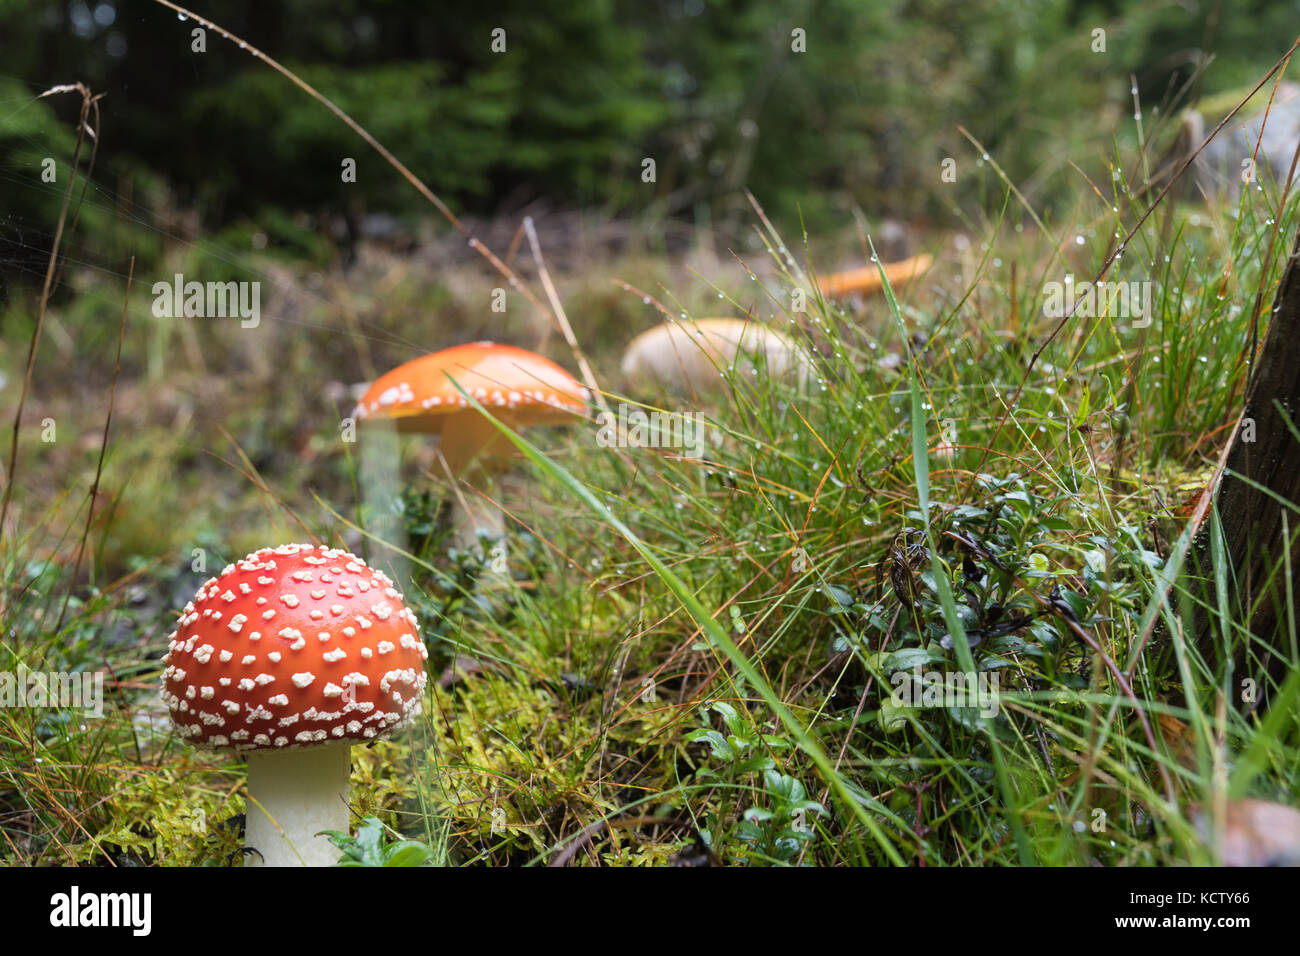 Death cup mushroom and other mushrooms in low angle view Stock Photo